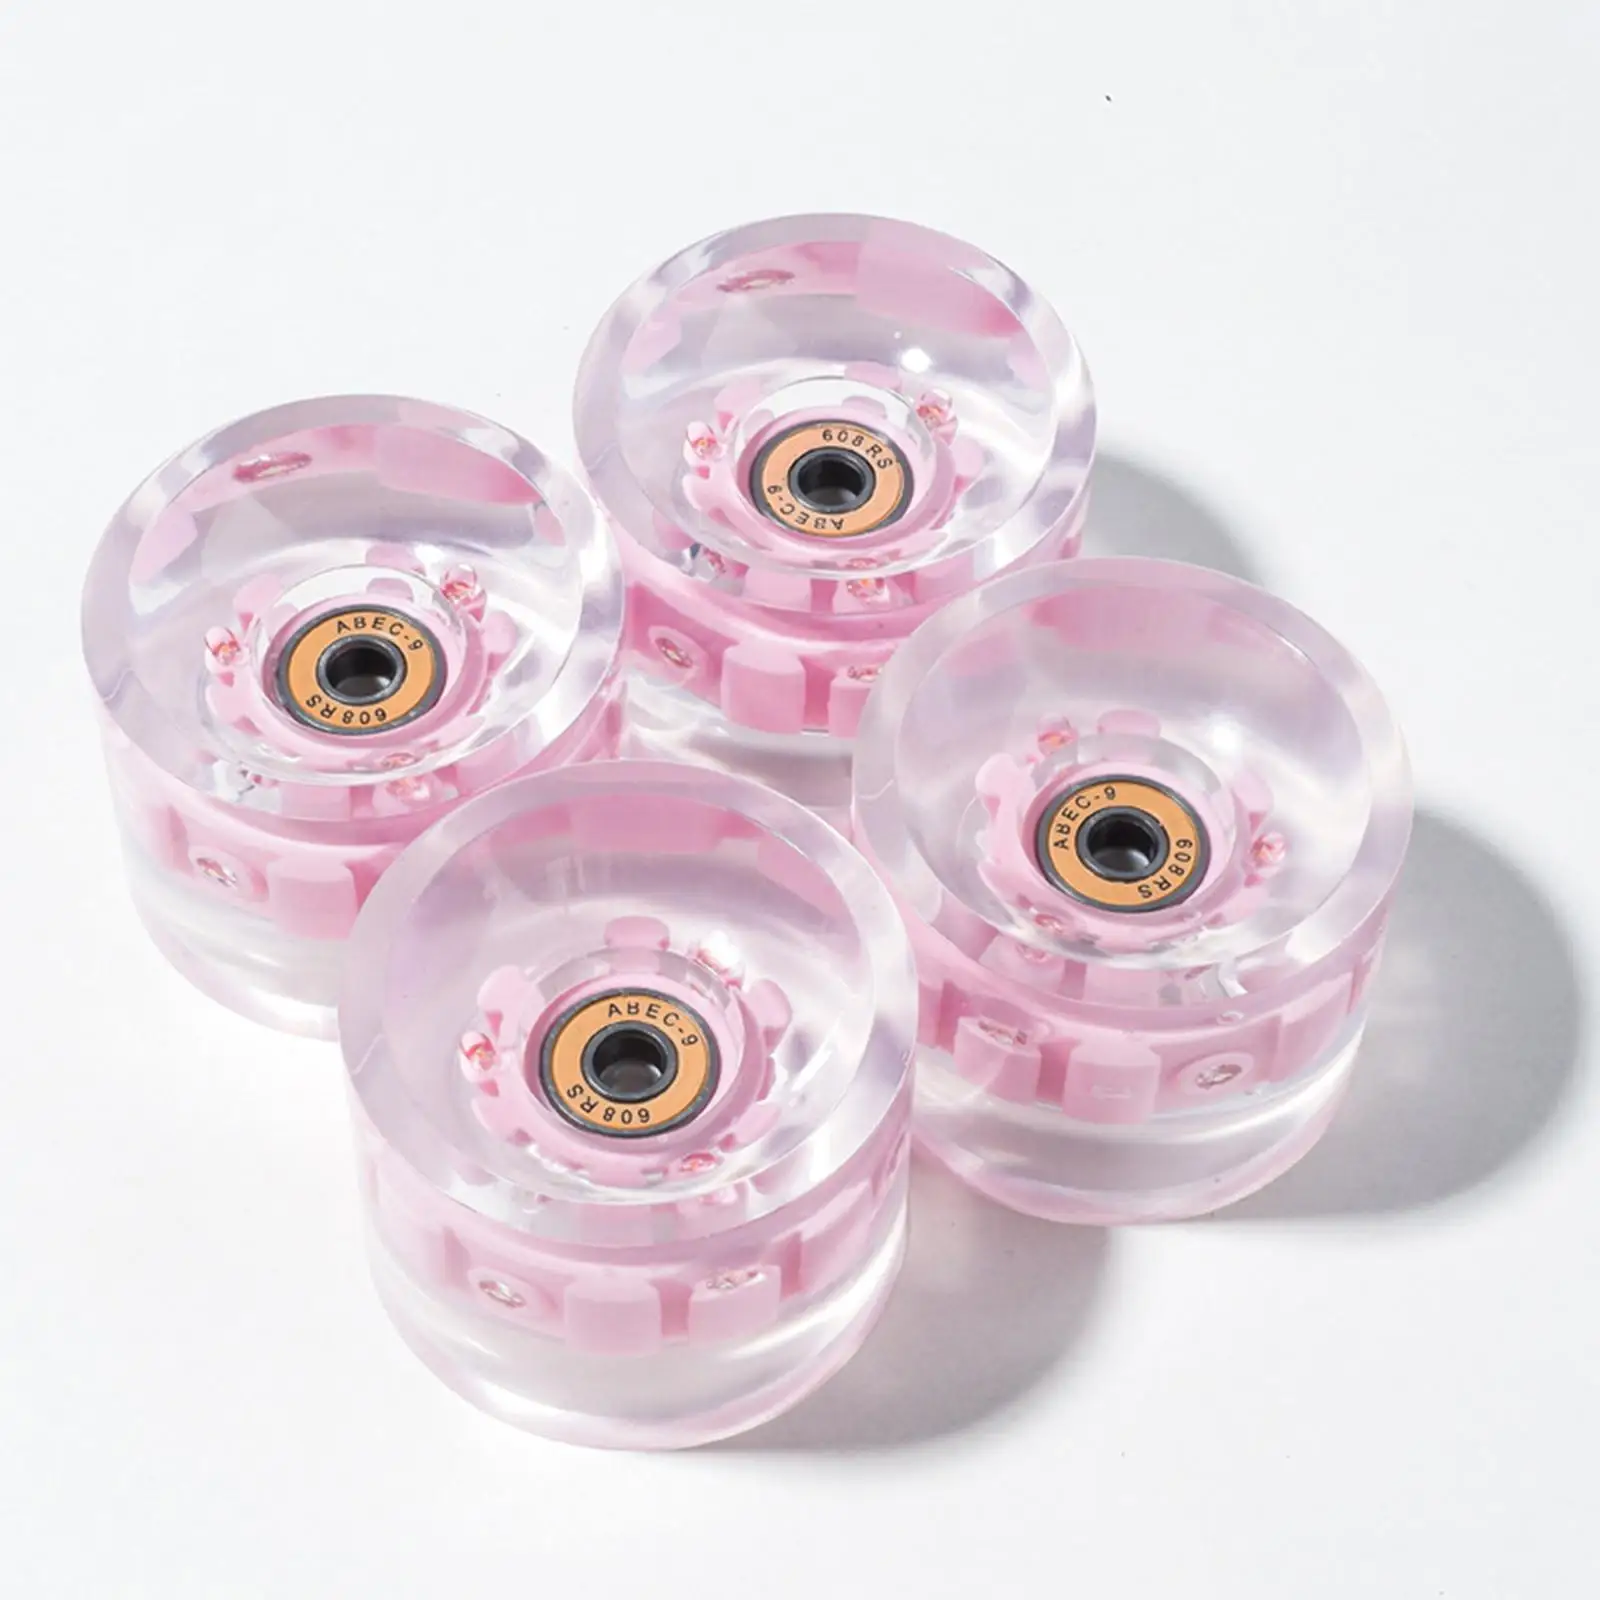 Skateboard Wheels, Replacement with Bearings, 78A, with LED Light Roller Skate